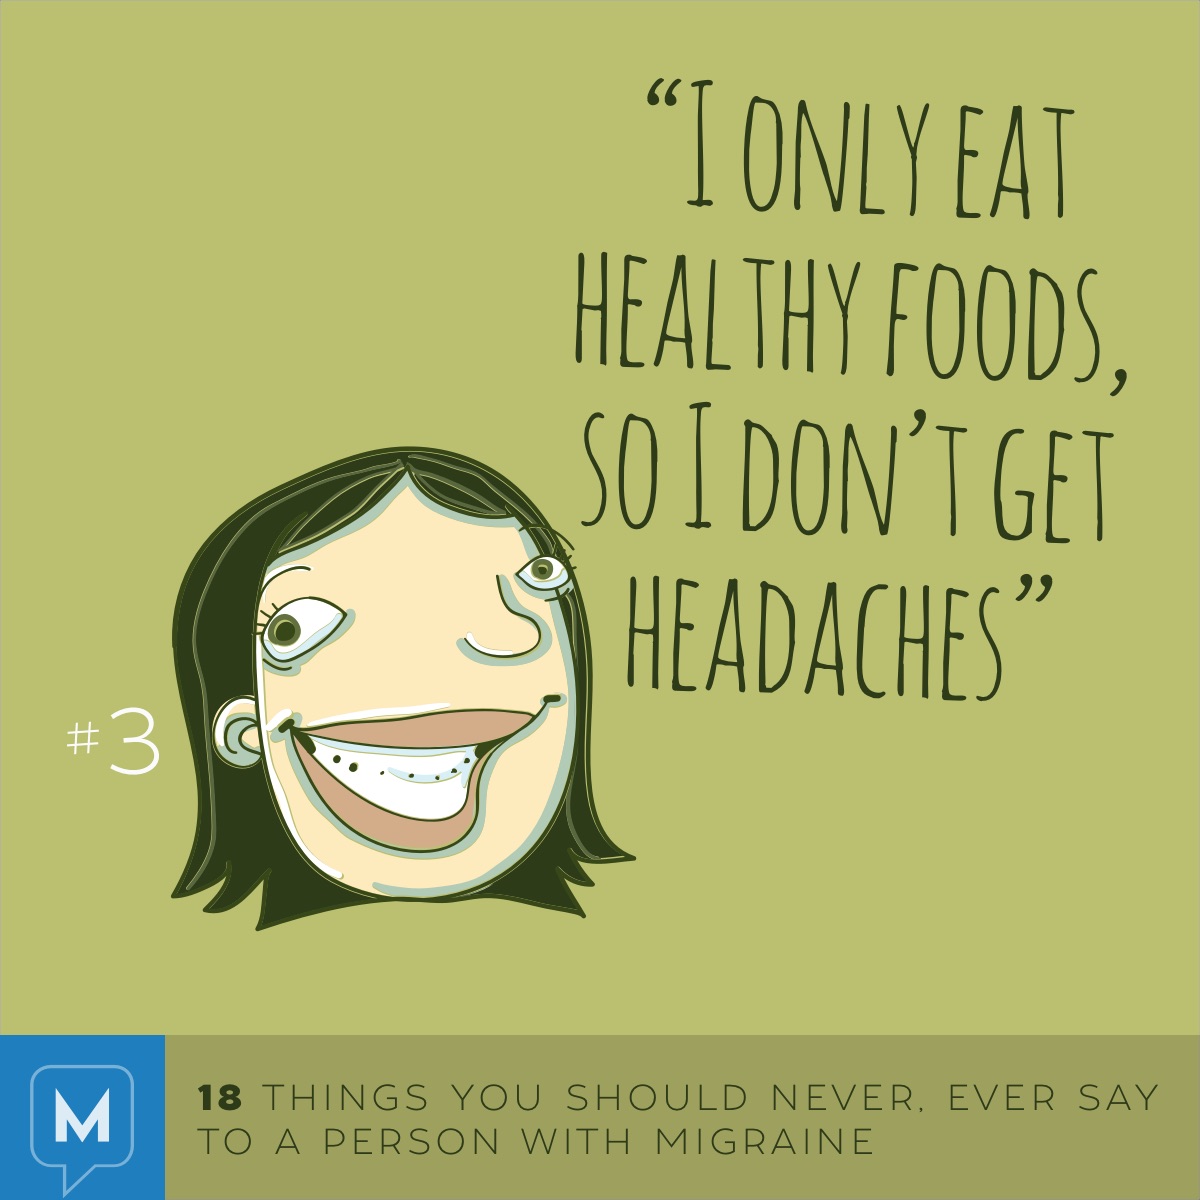 Things not to say to a person with migraine